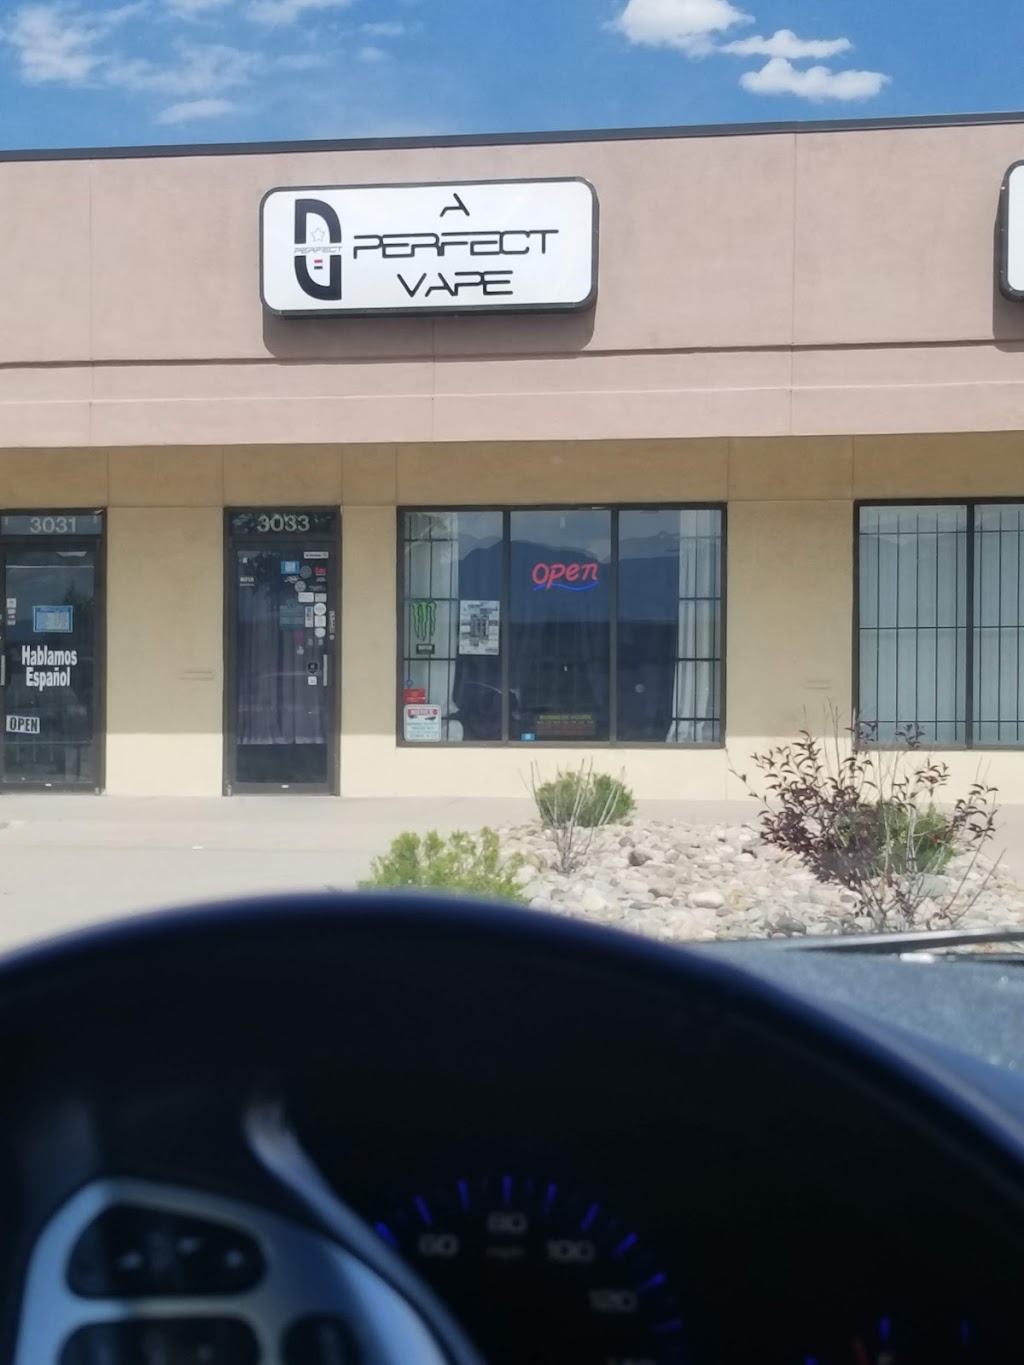 A Perfect Vape | 3033 Jet Wing Dr, Colorado Springs, CO 80916 | Phone: (719) 358-6641